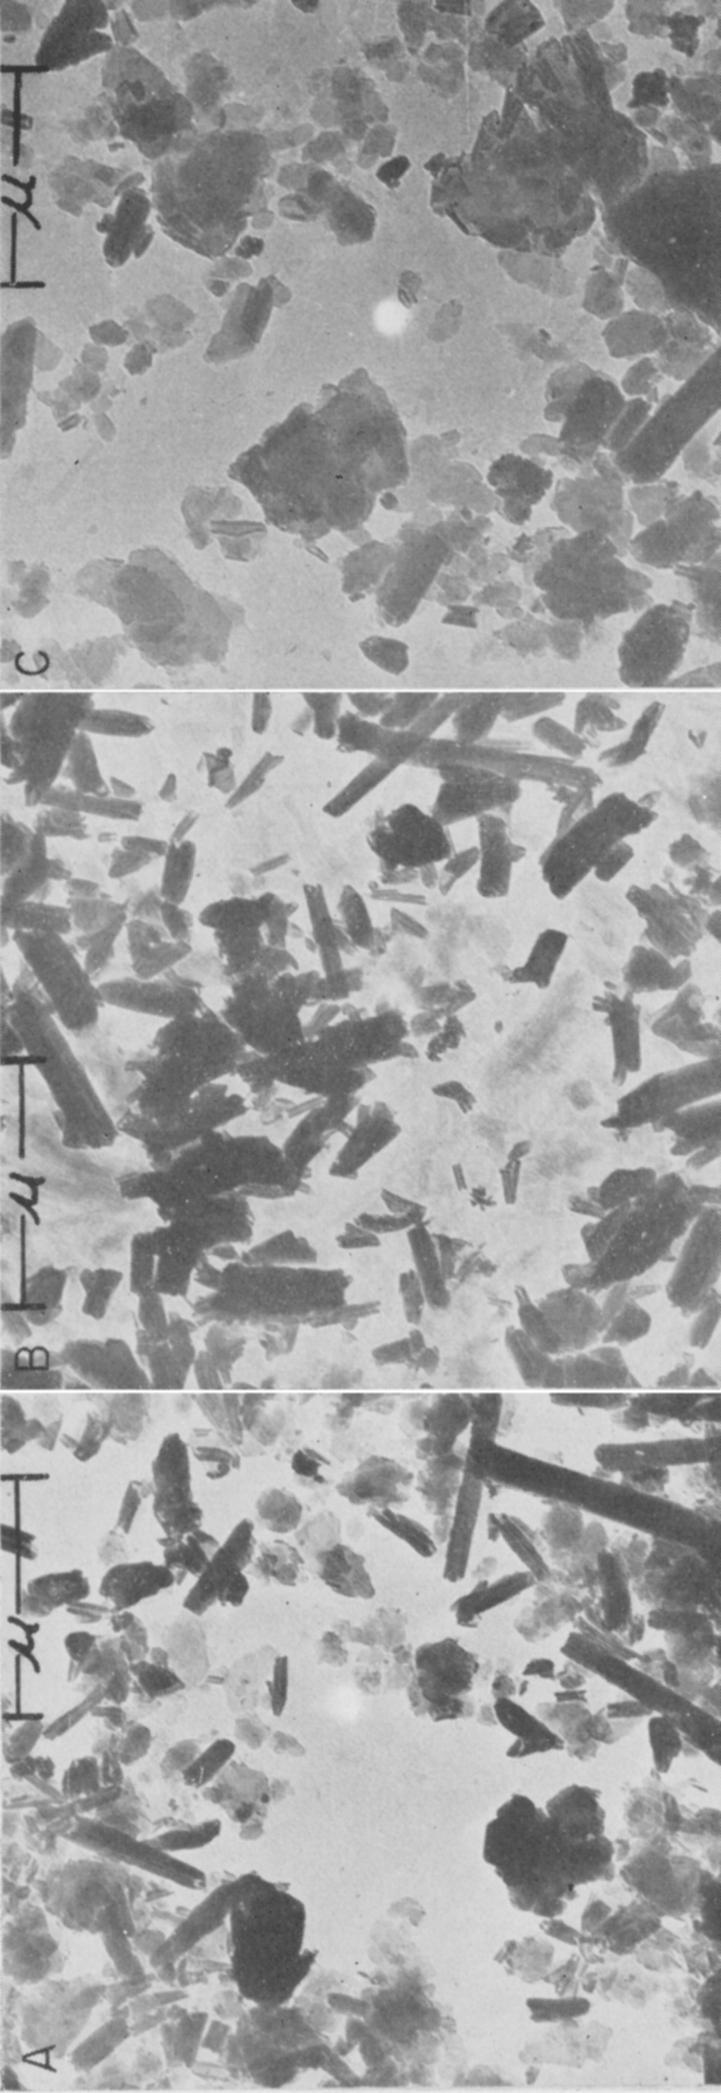 PLATE 1.--Electron micrographs. (A) transported (?